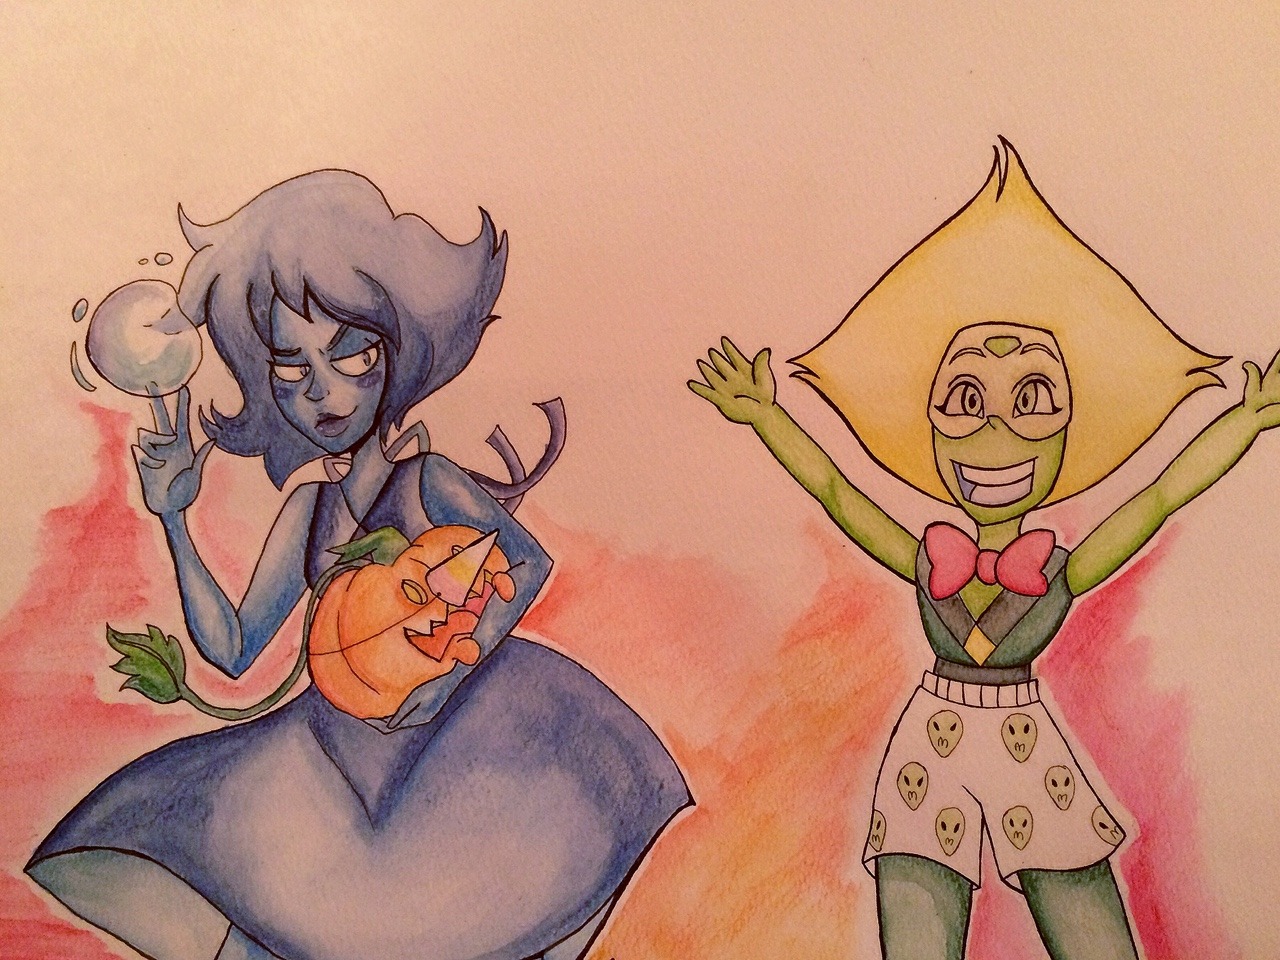 I did a collab with my friend she drew peri and I drew lapis :D